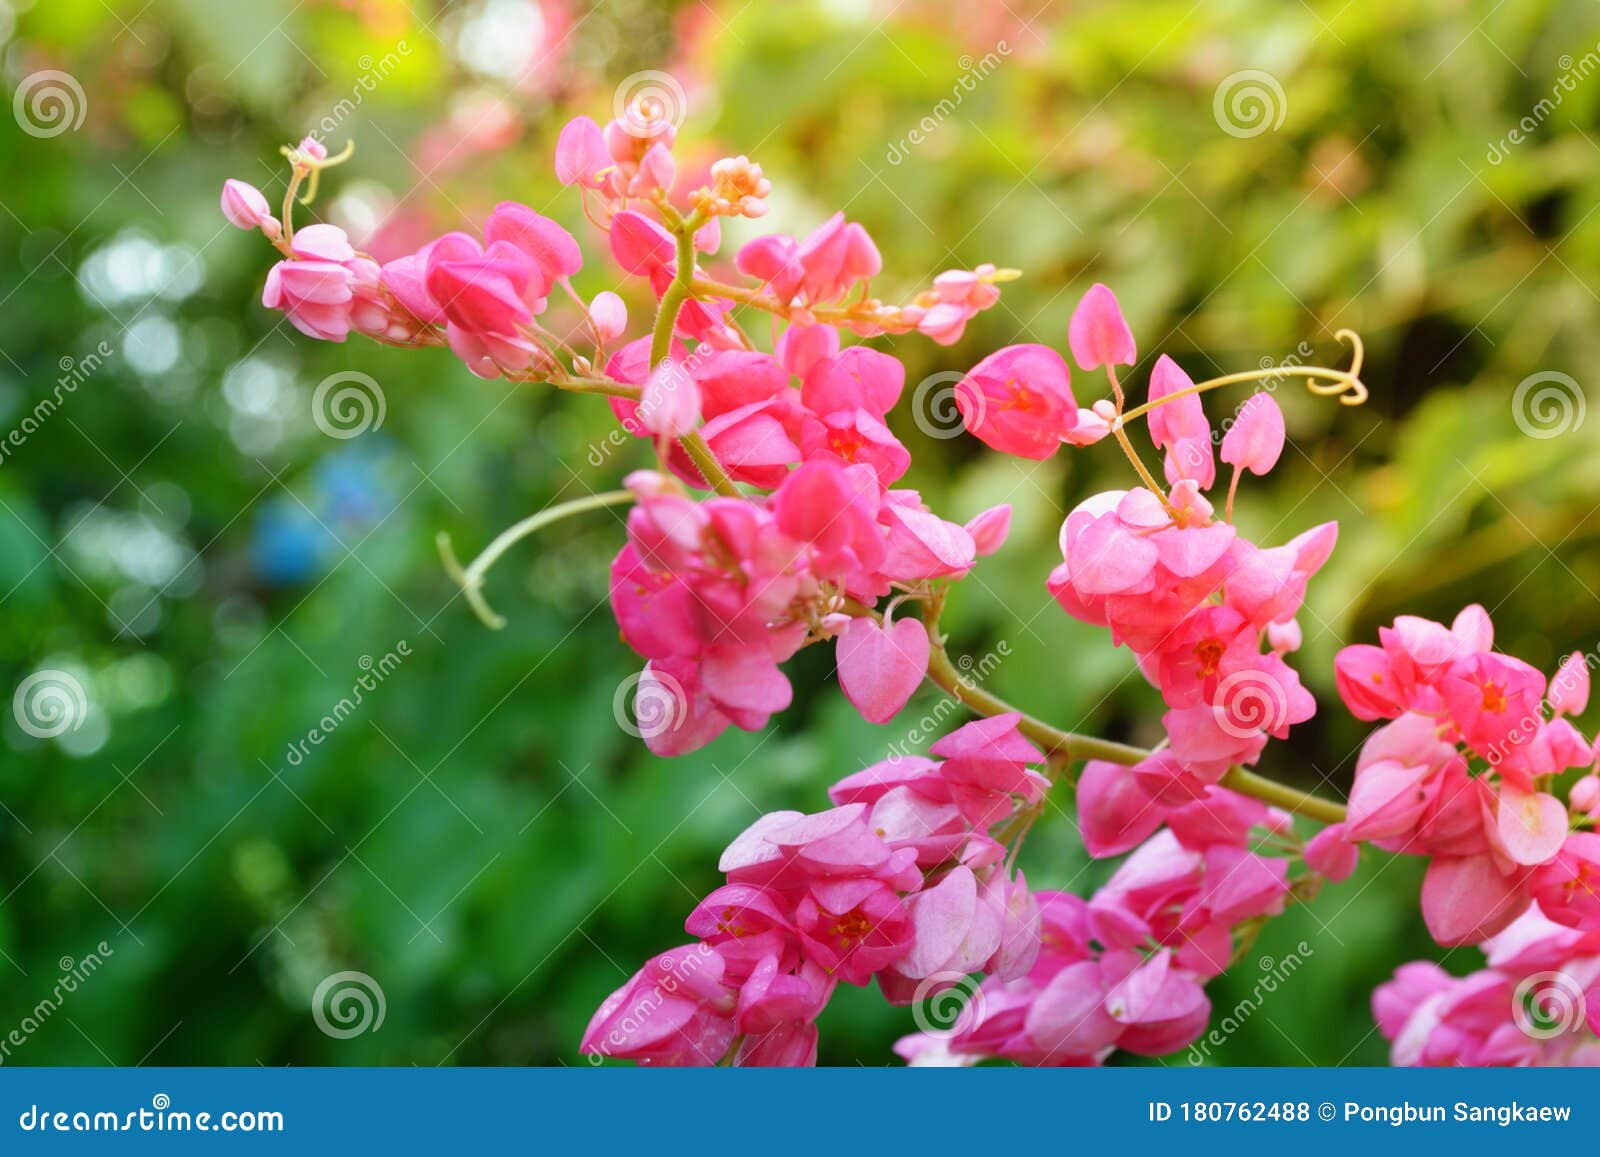 Pink Coral Vine Flower Blooming And Green Light Bokeh Background Stock Photo Image Of Leaf Plant 180762488